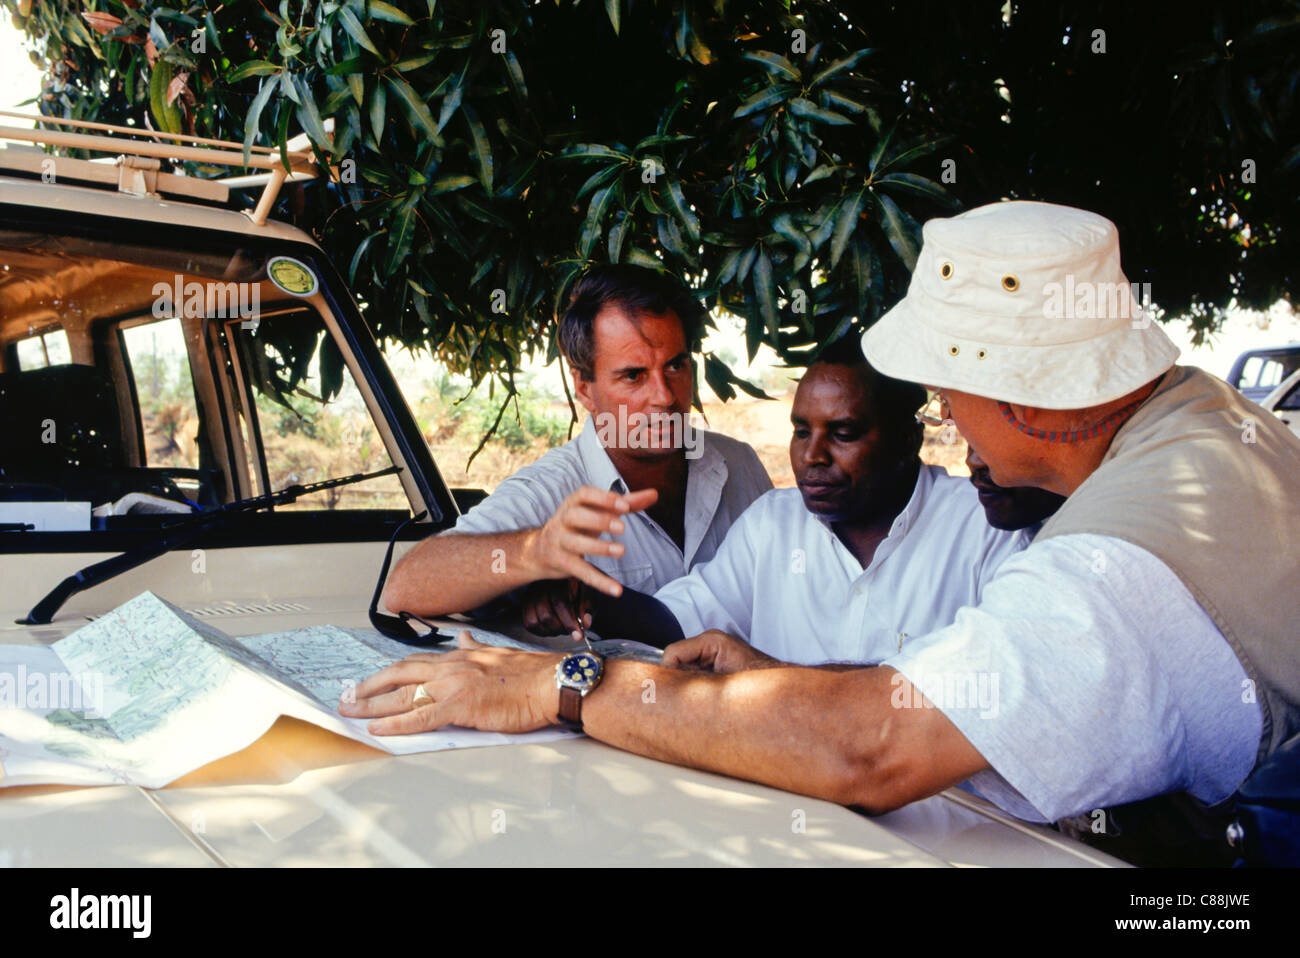 Gombe, Tanzania. Group of tourists on safari looking at a map on the bonnet of a four wheel drive vehicle. Stock Photo